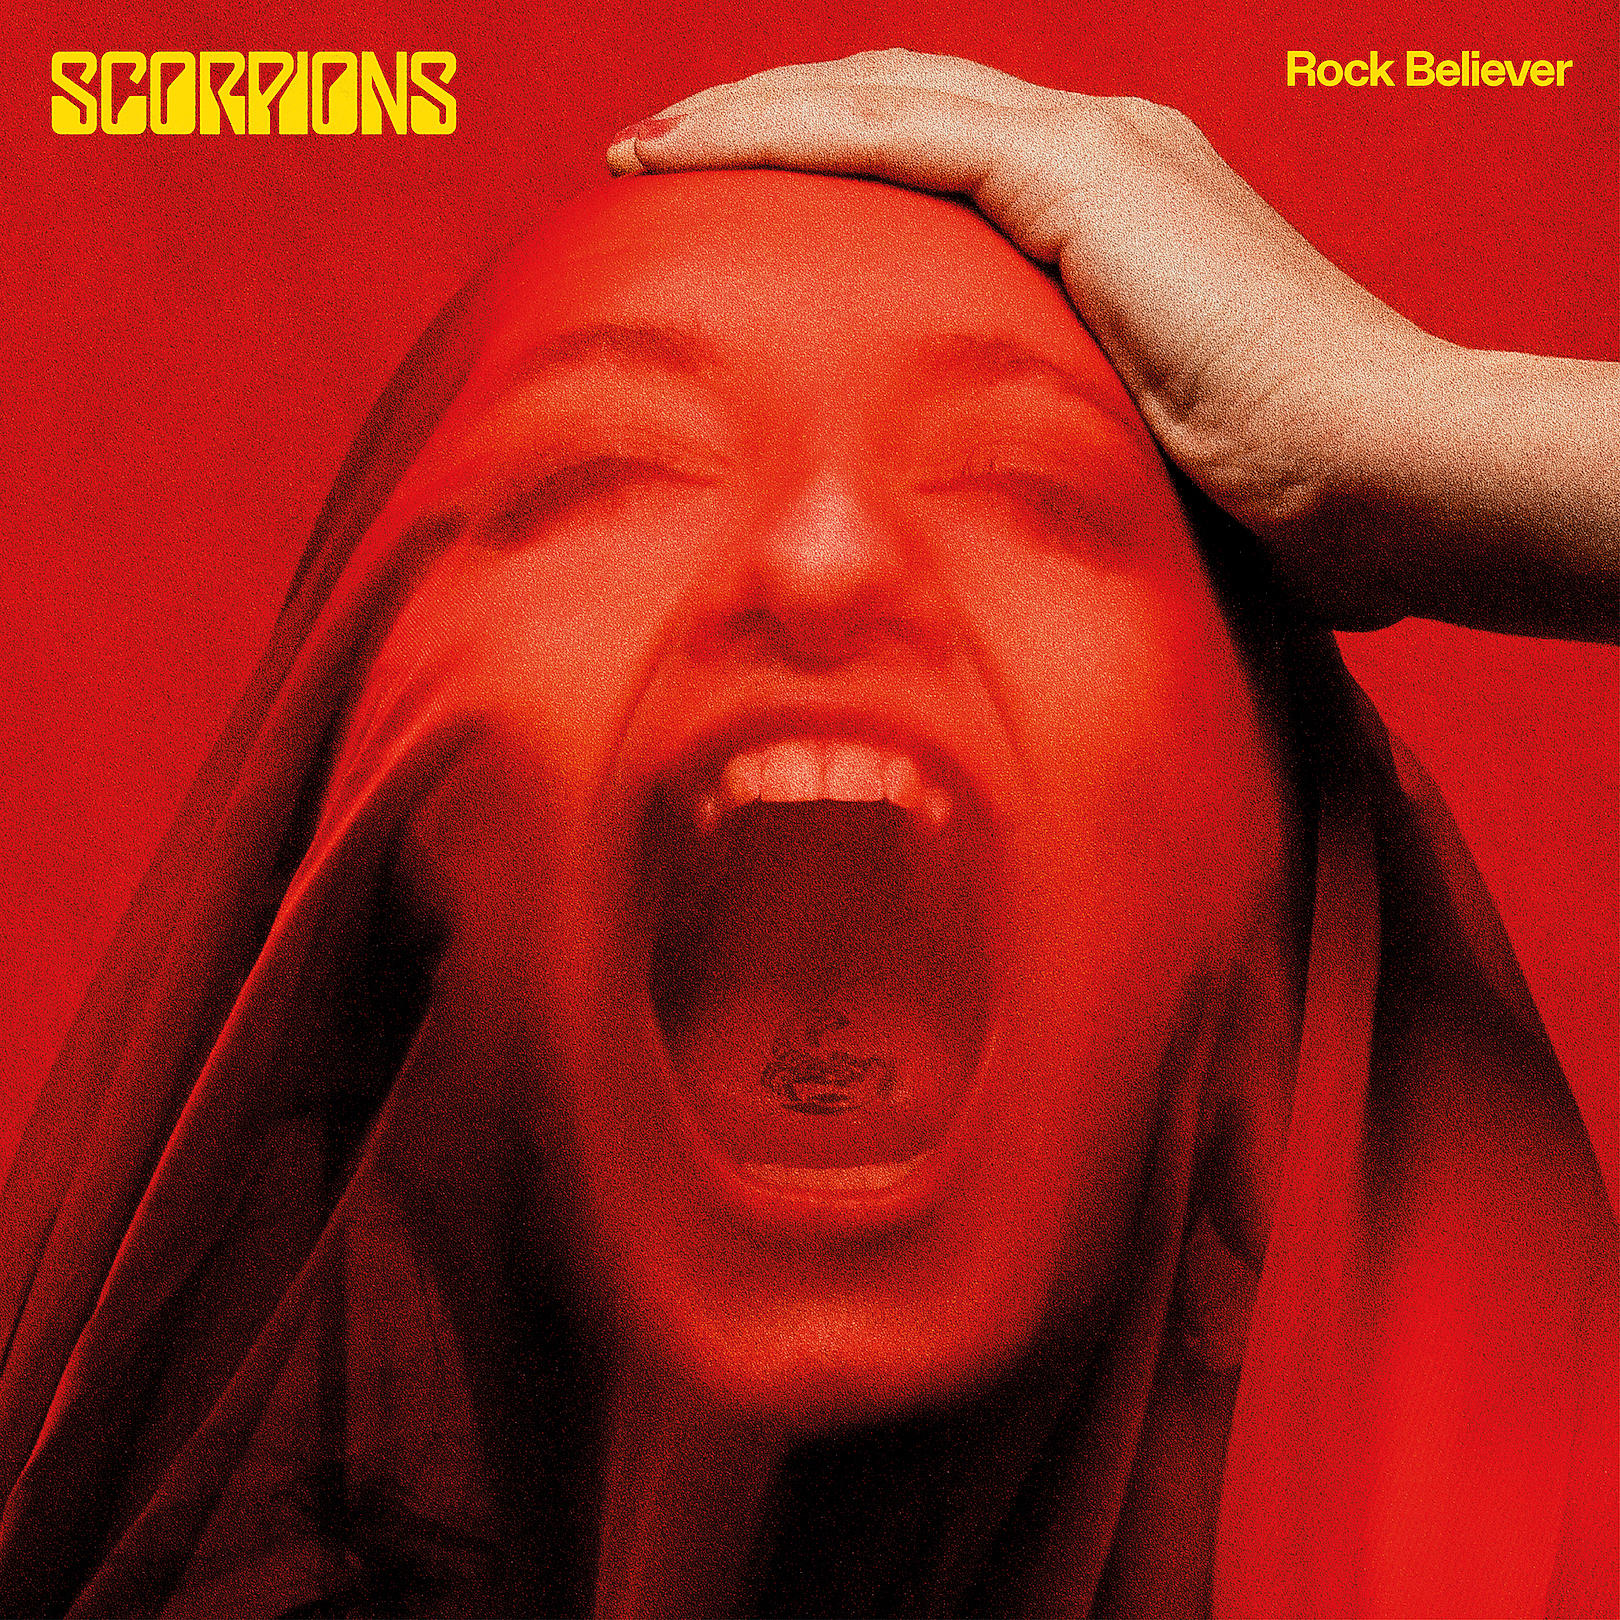 Scorpions Debut New 'Peacemaker' + Announce 19th Album